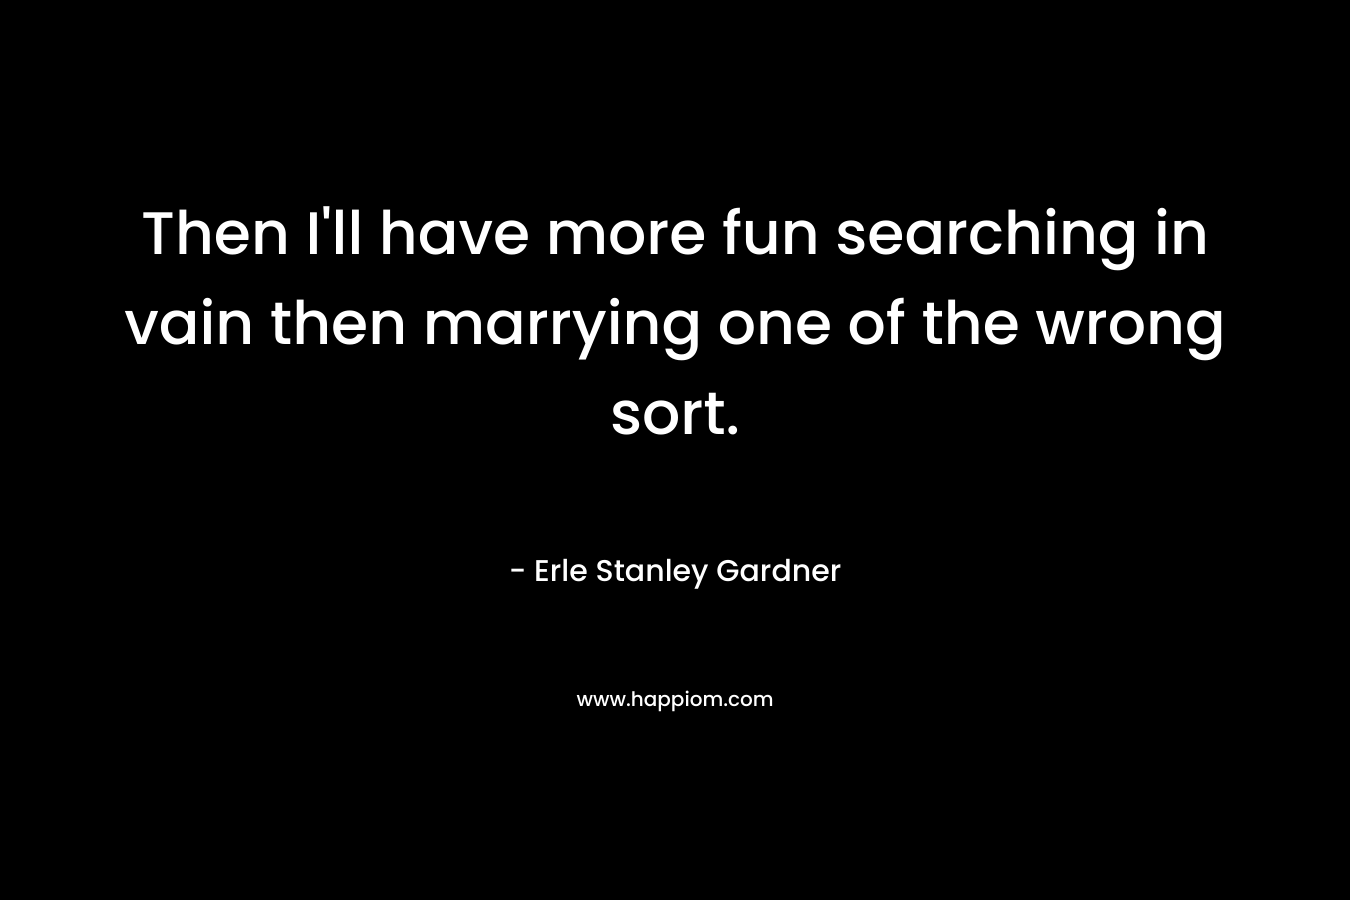 Then I’ll have more fun searching in vain then marrying one of the wrong sort. – Erle Stanley Gardner